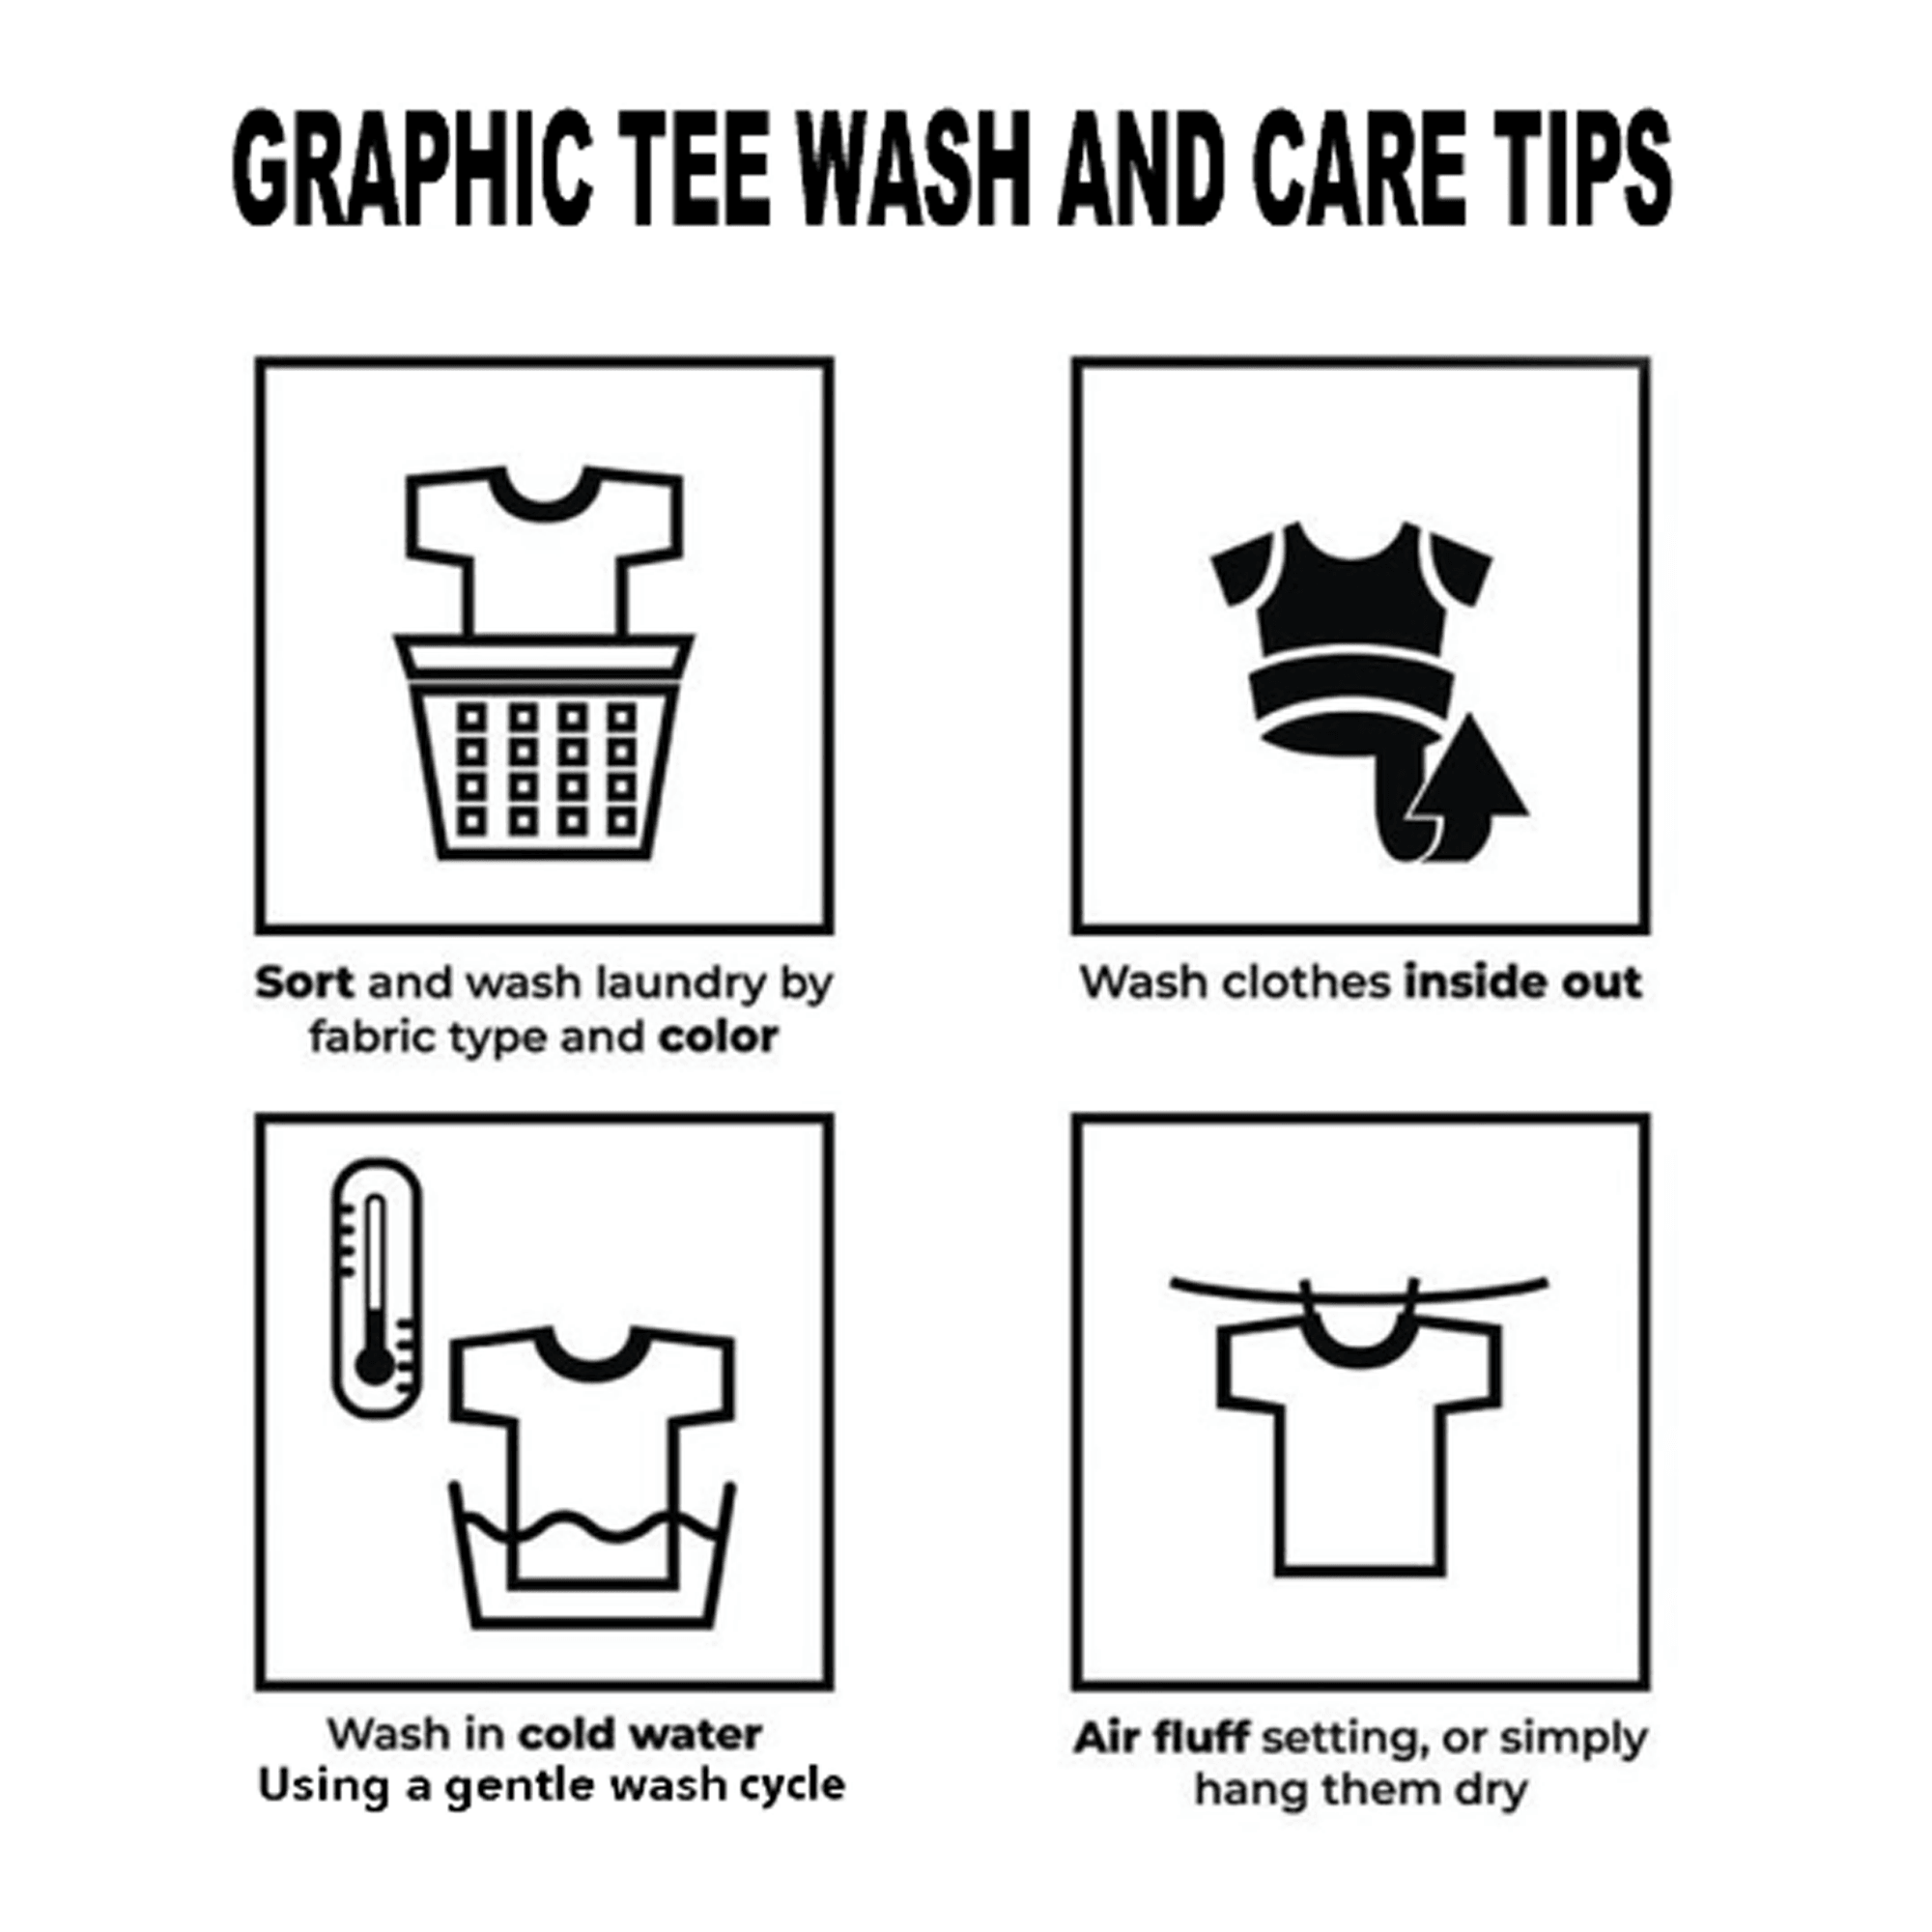 Trap is Life Shirt care tips photo